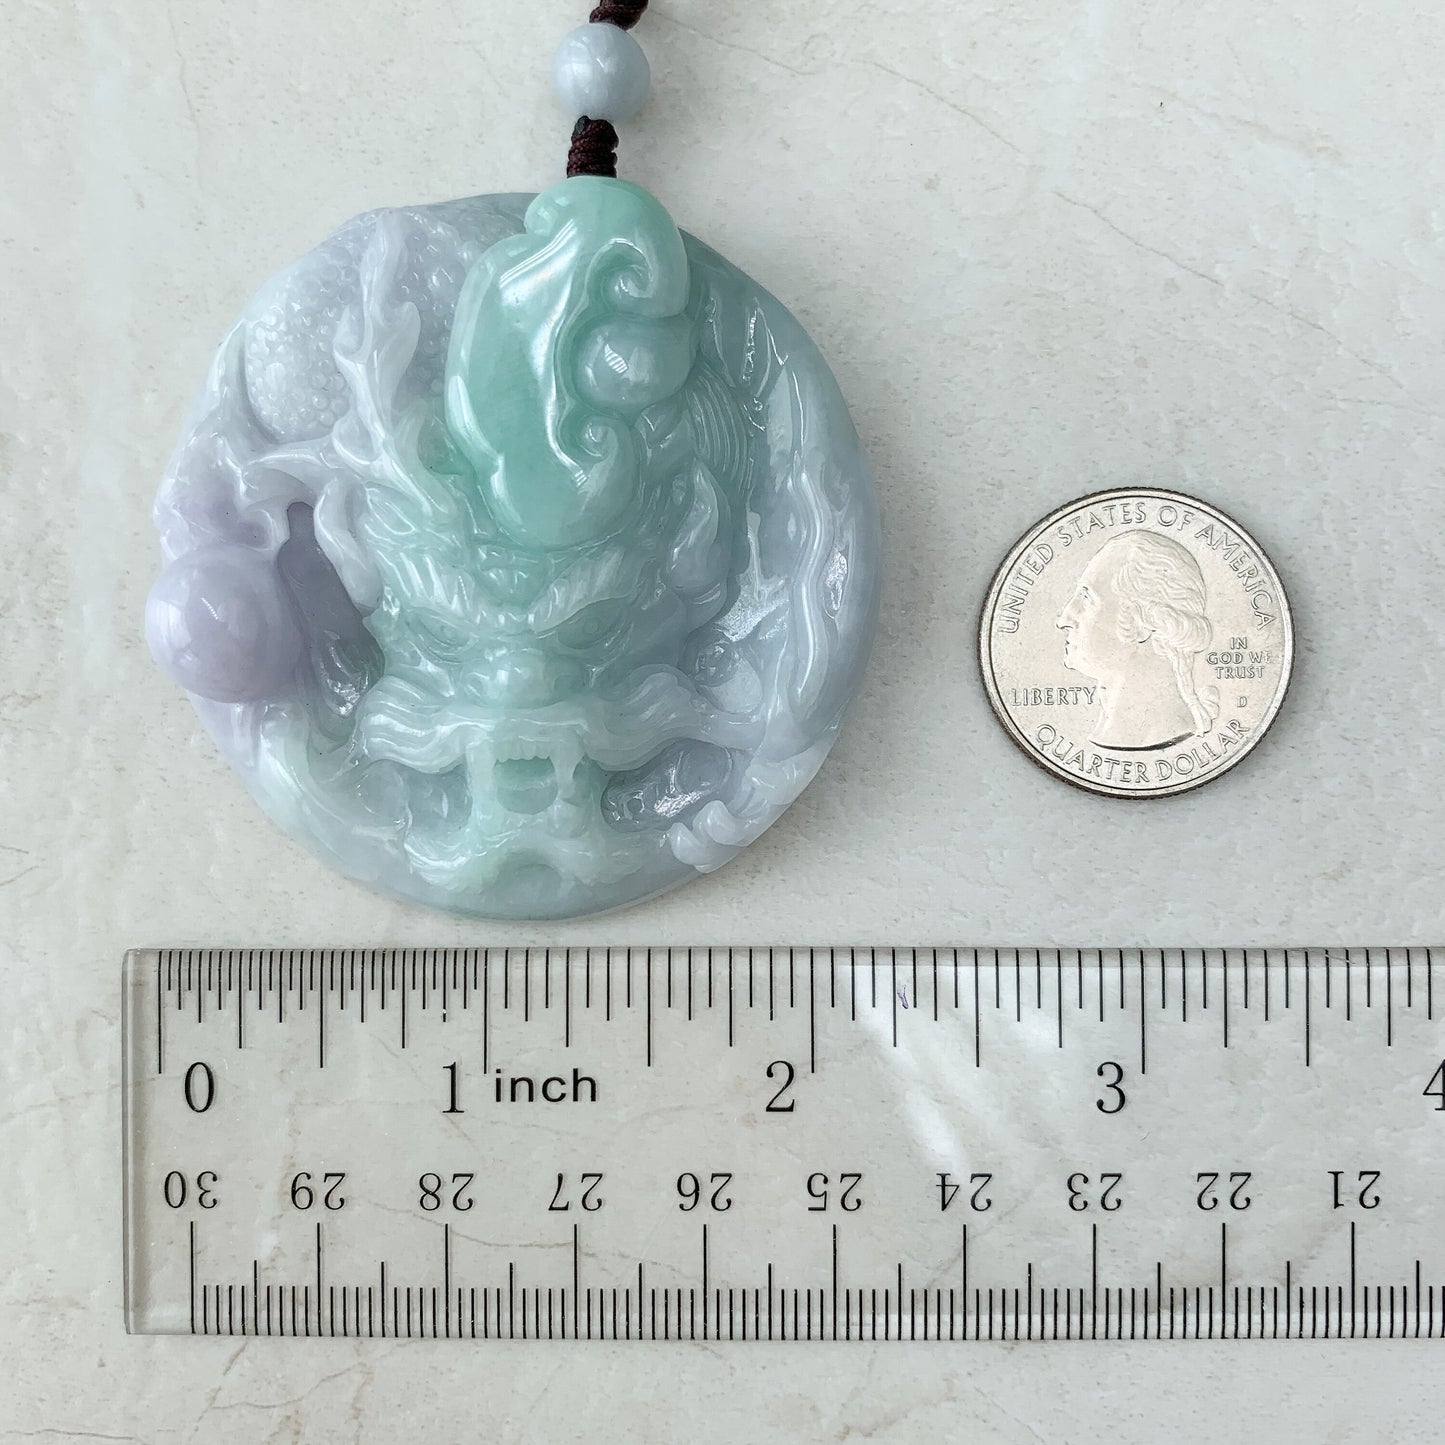 Purple Green Jadeite Jade Dragon Chinese Zodiac Hand Carved Pendant Necklace, YJ-0321-0324500 - AriaDesignCollection